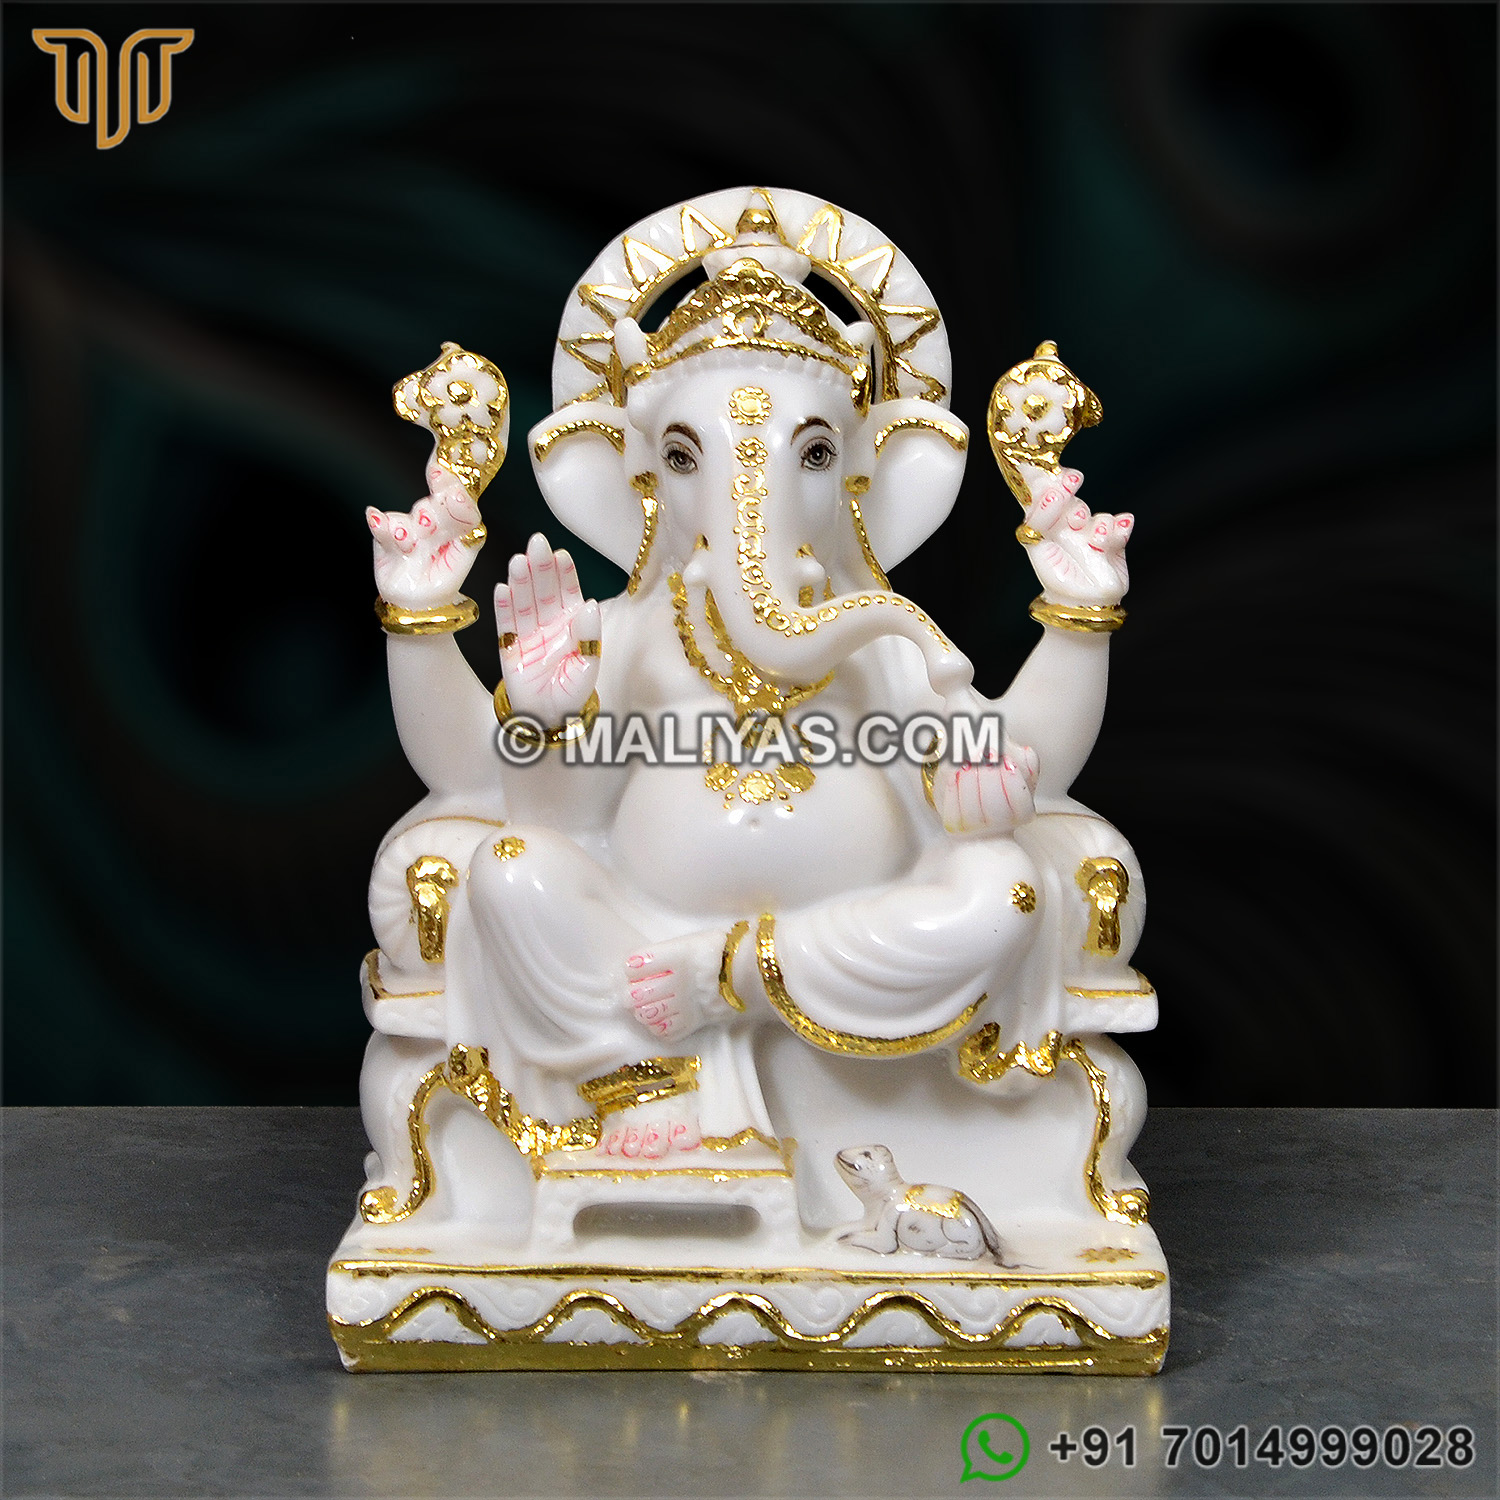 Culture Marble Lord Ganesha Statue